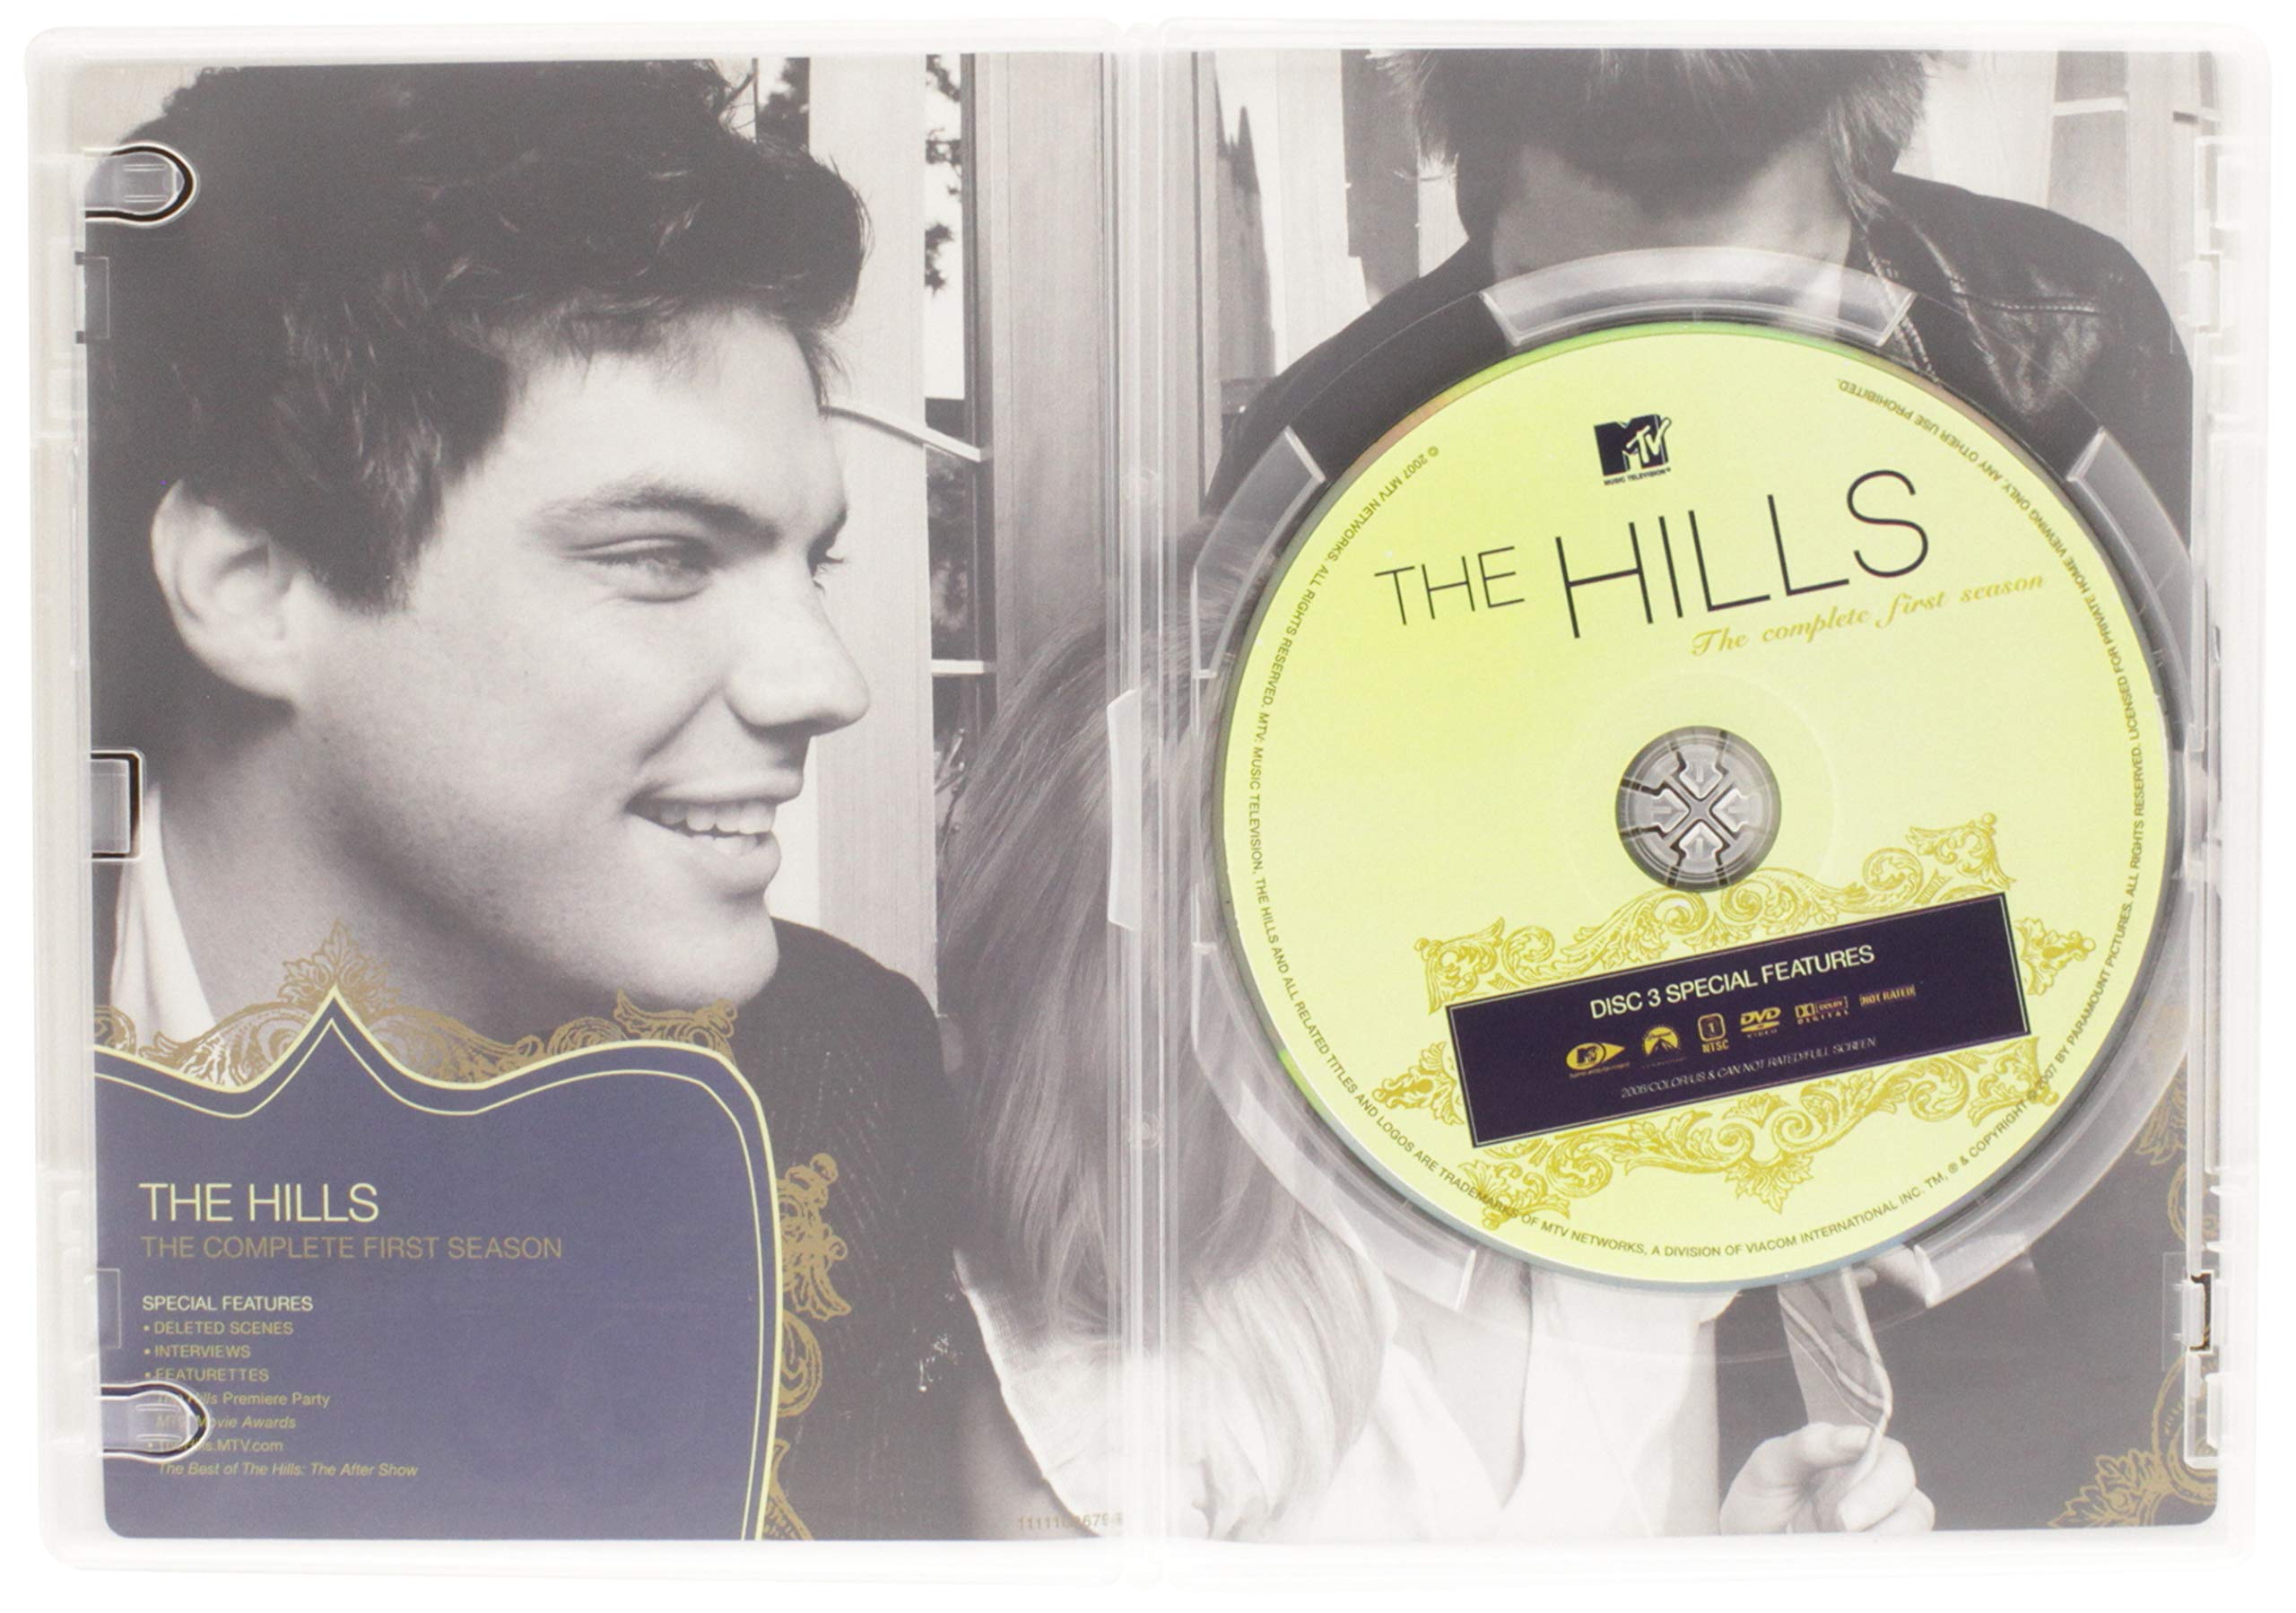 The Hills: The Complete First Season (DVD) - image 3 of 7